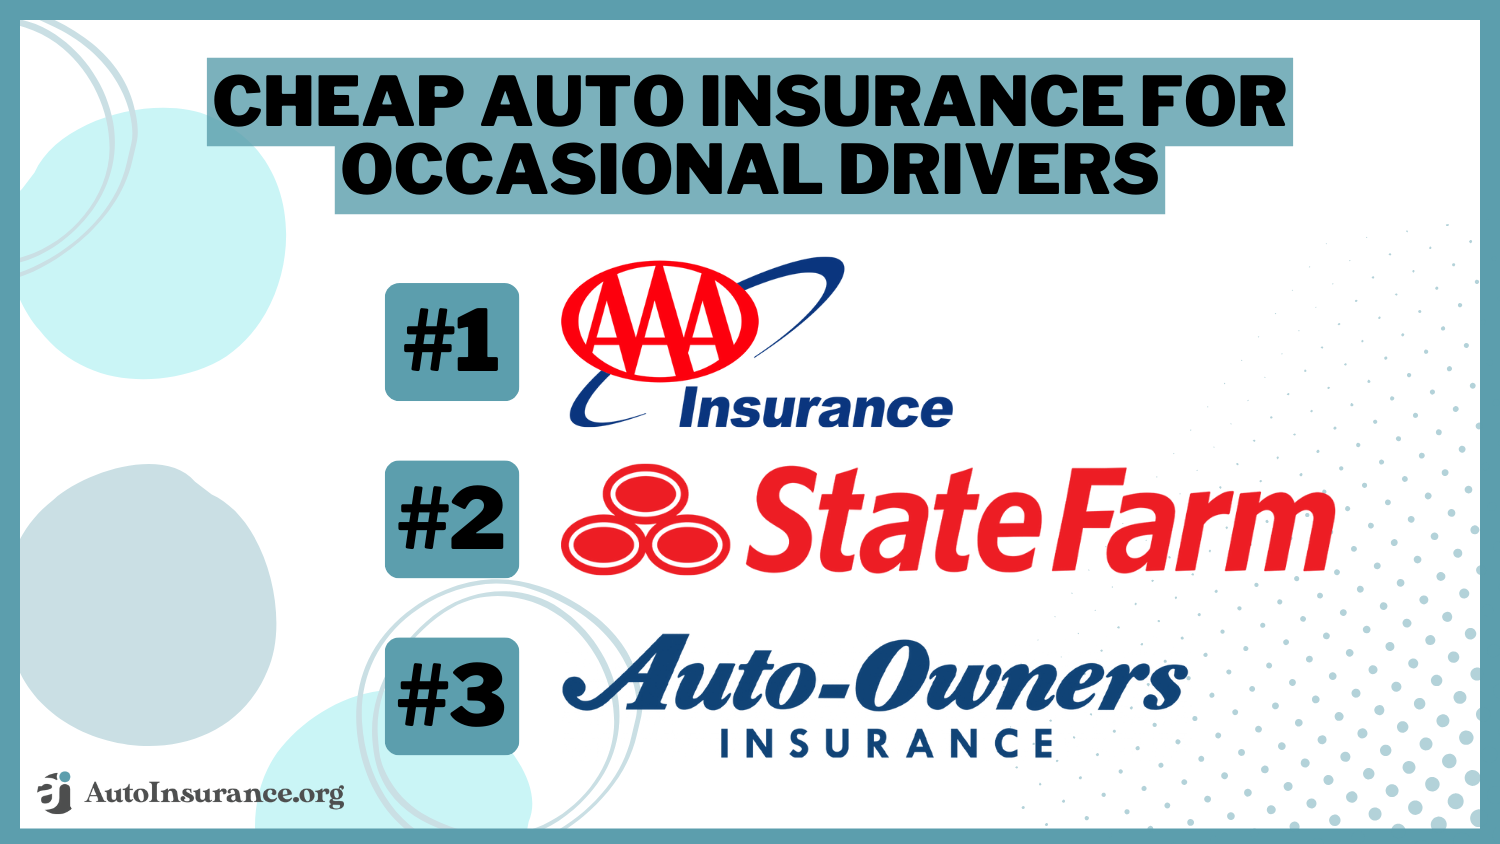 AAA, State Farm, Auto-Owners: Cheap Auto Insurance for Occasional Drivers 